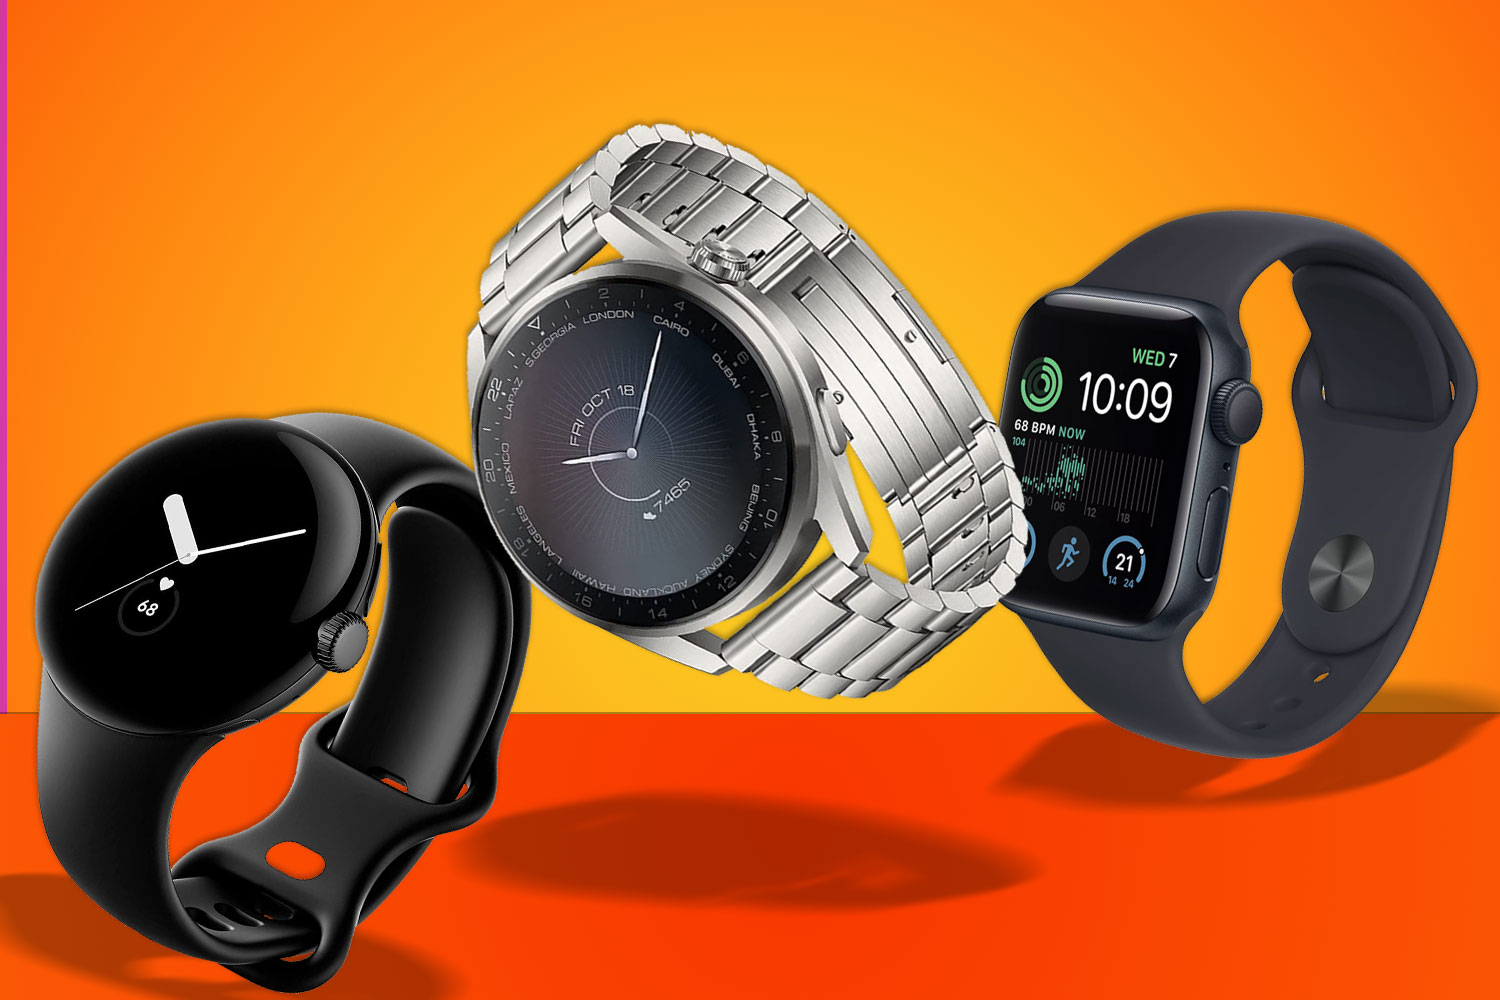 smartwatch and Android smartwatches reviewed